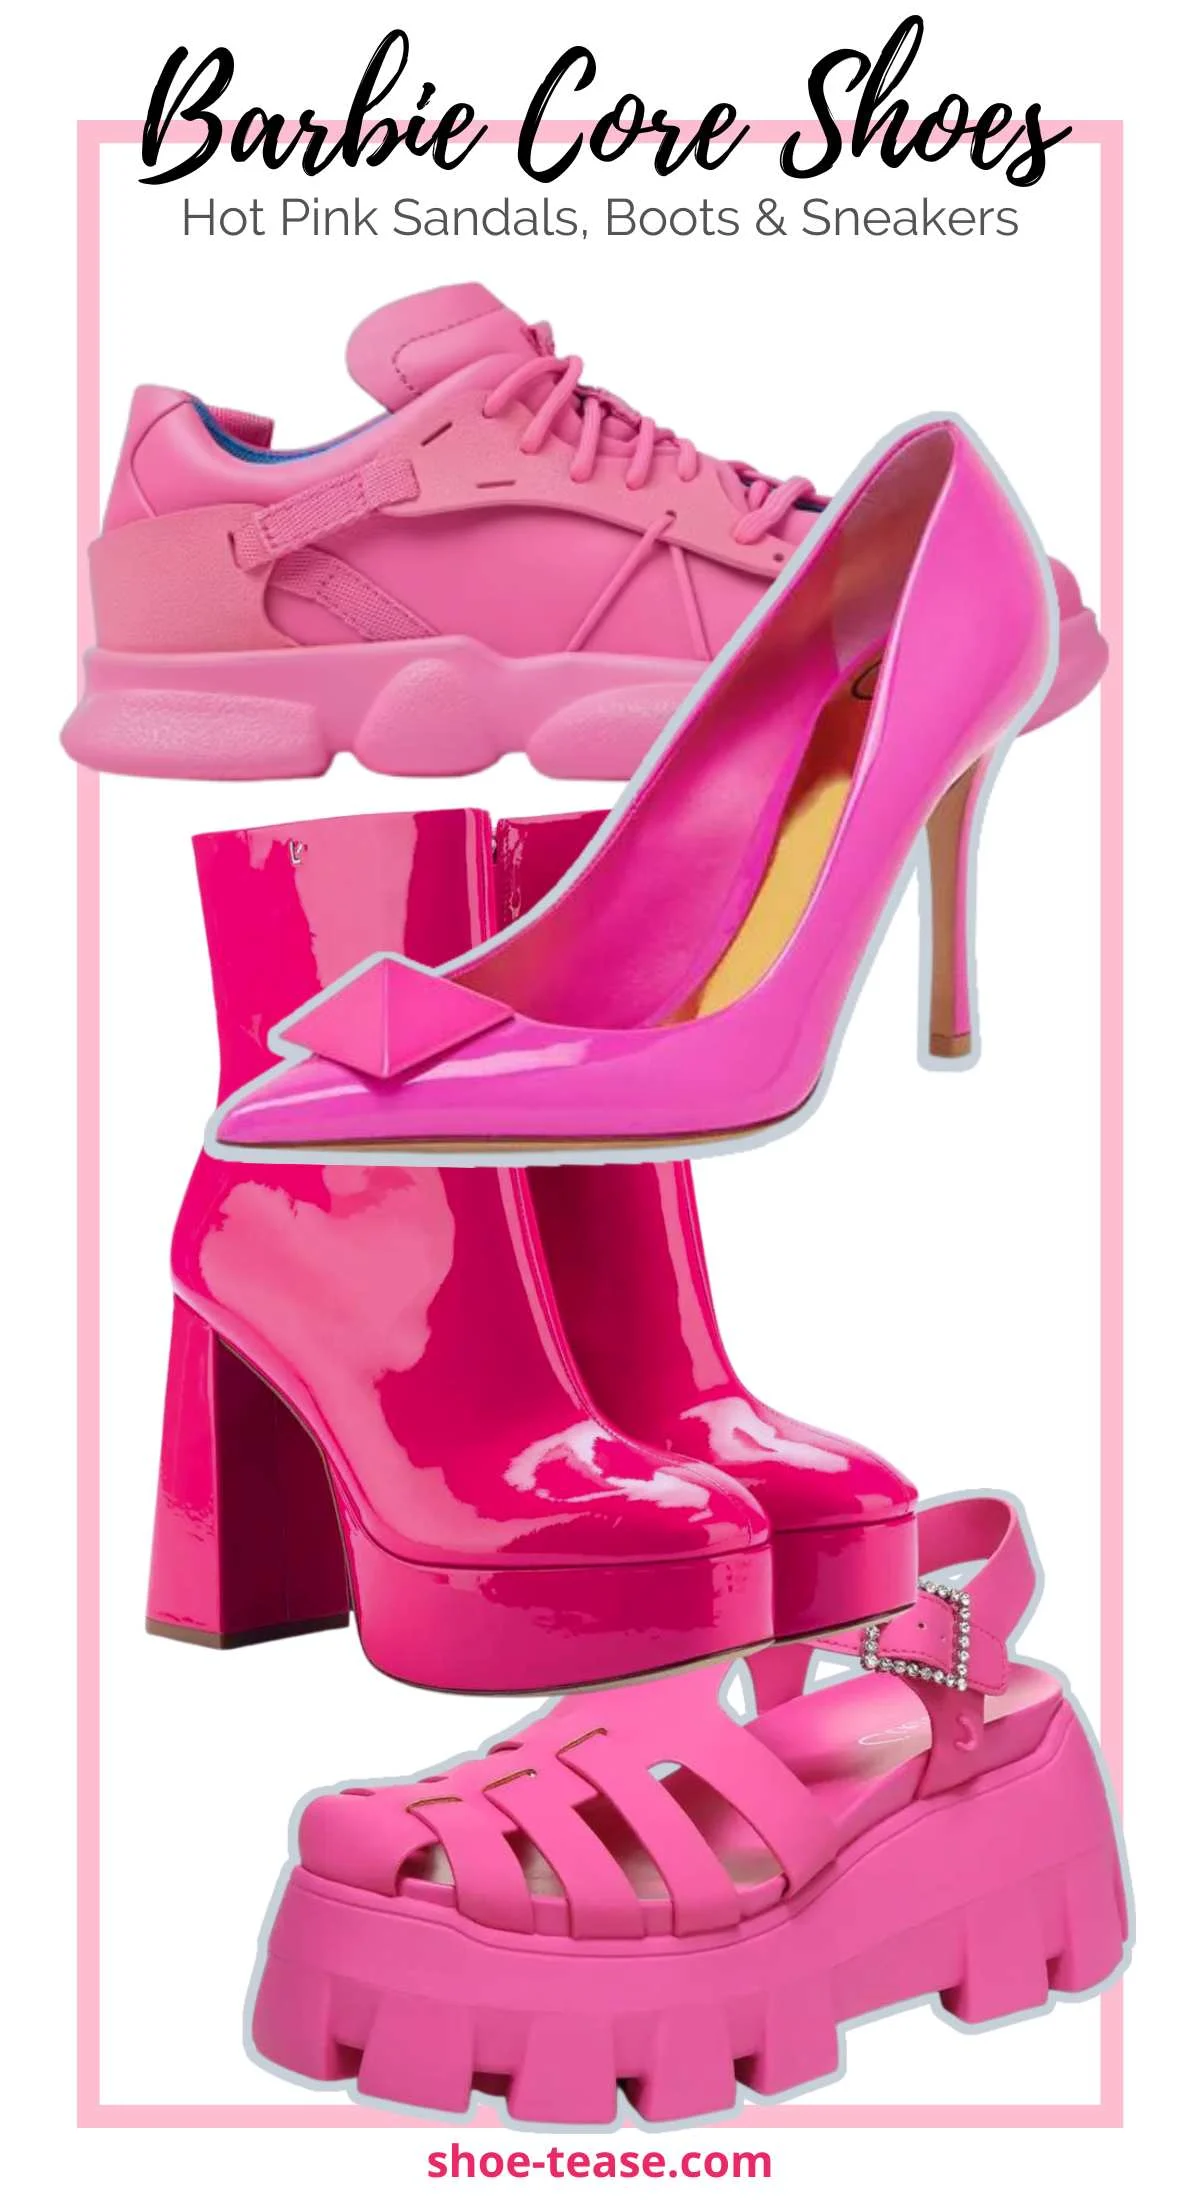 Collage of 4 hot pink women's shoes under text reading Barbie Core Shoes Hot Pink Sandals Boots & Sneakers.